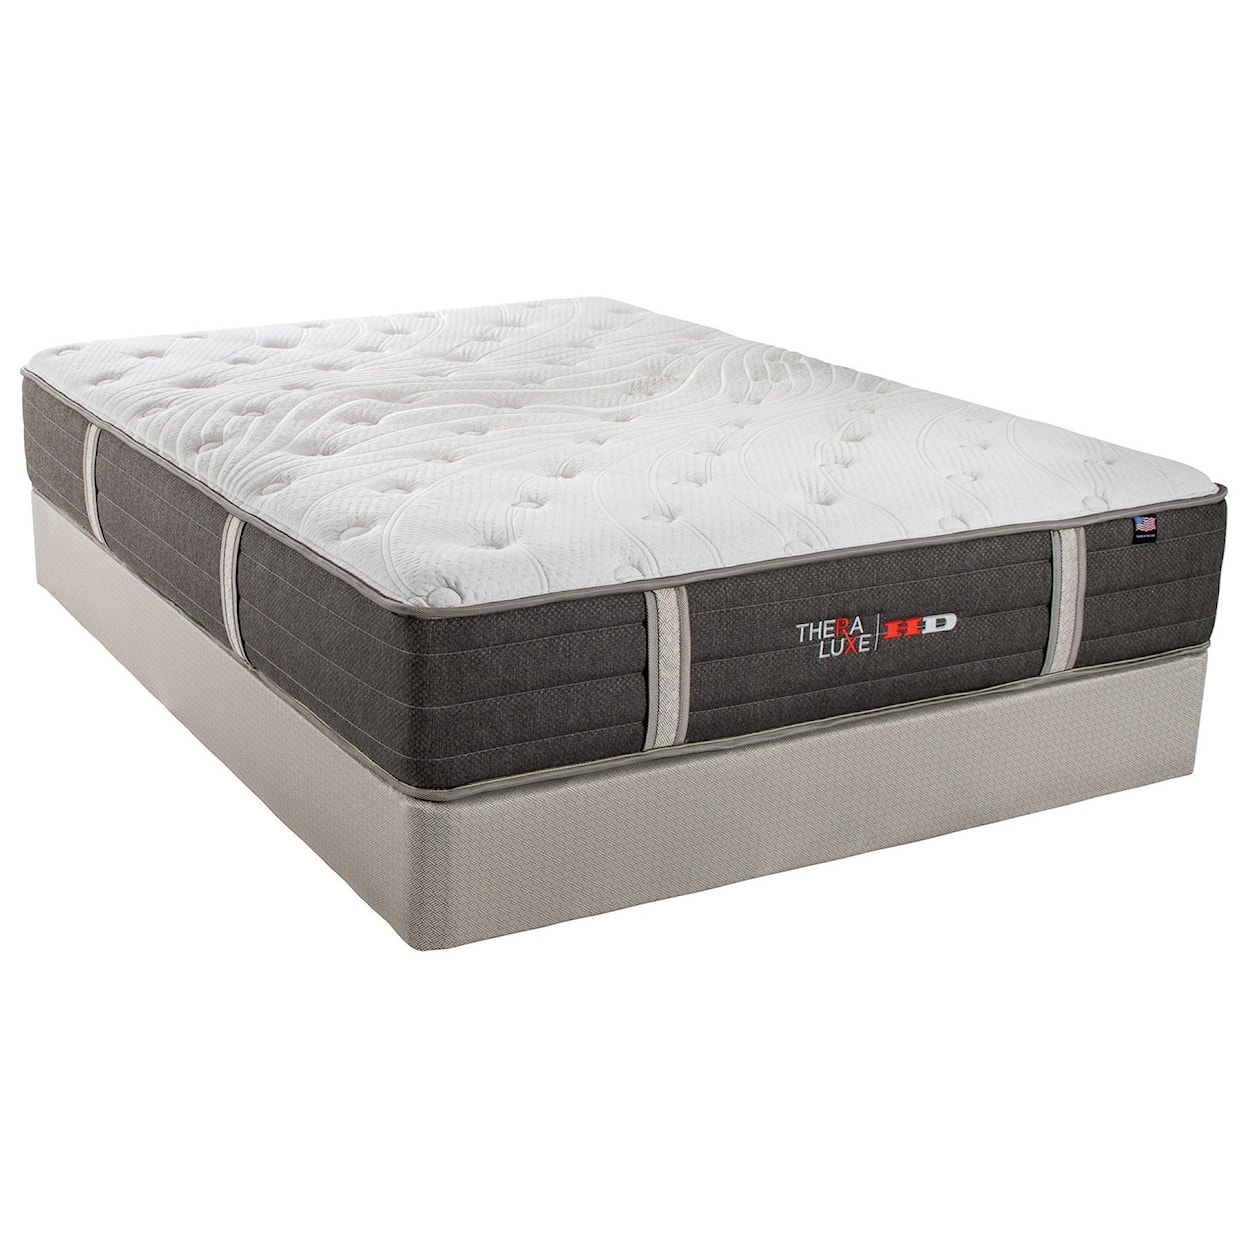 Therapedic Theraluxe Spruce Cal King Pocketed Coil Mattress Set